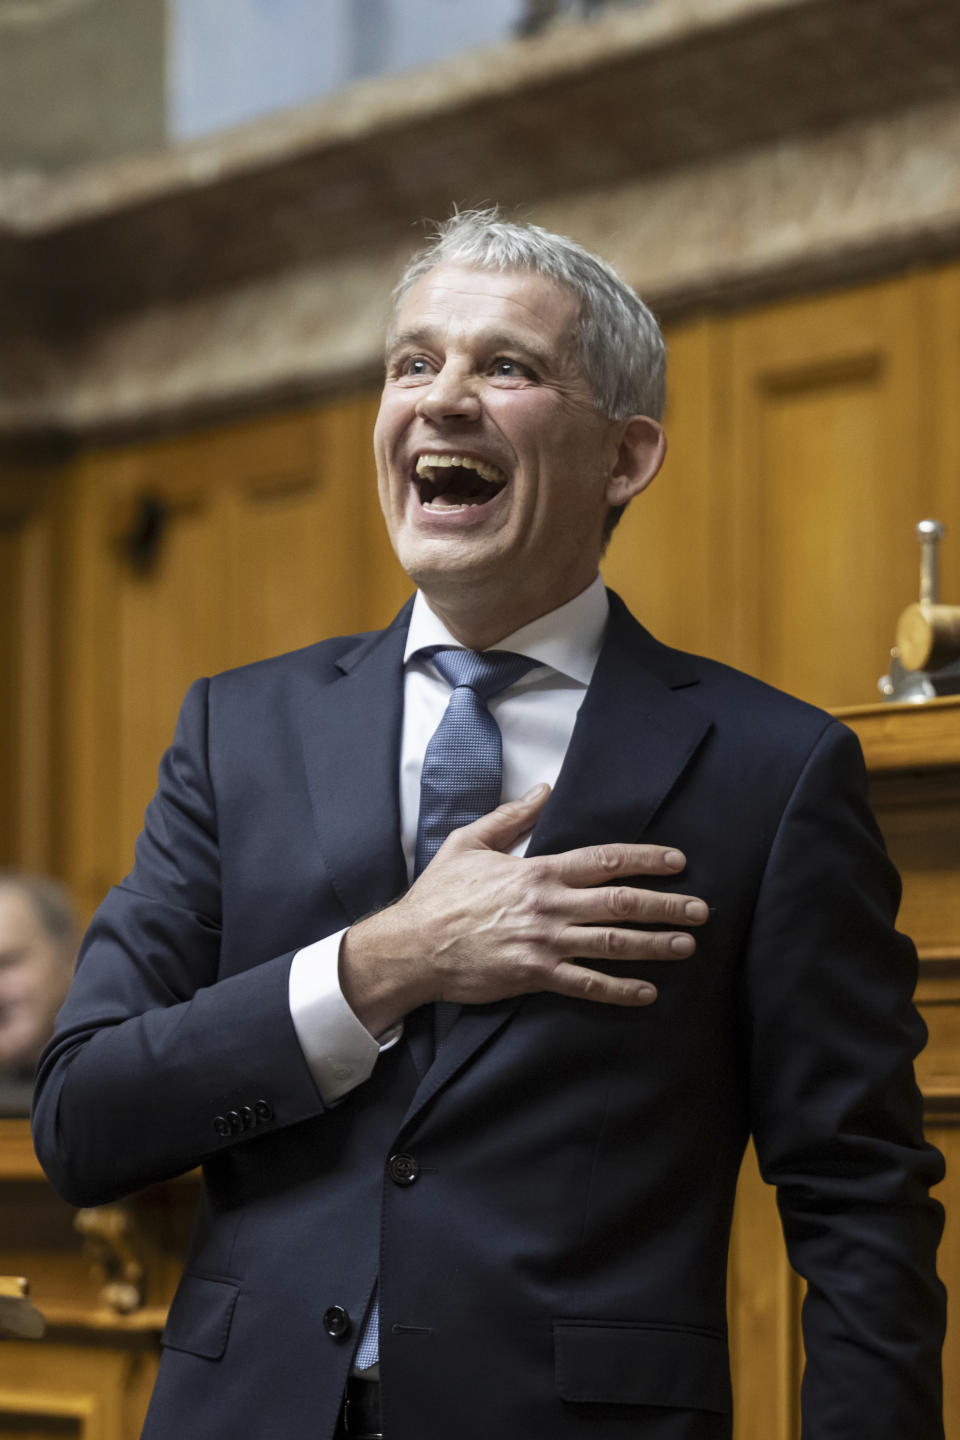 Newly elected Federal Councillor Beat Jans, gestures during the swearing-in ceremony following the Federal Council general election by the United Federal Assembly, in Bern, Switzerland, Wednesday, Dec. 13 2023. (Peter Schneider/Keystone via AP)